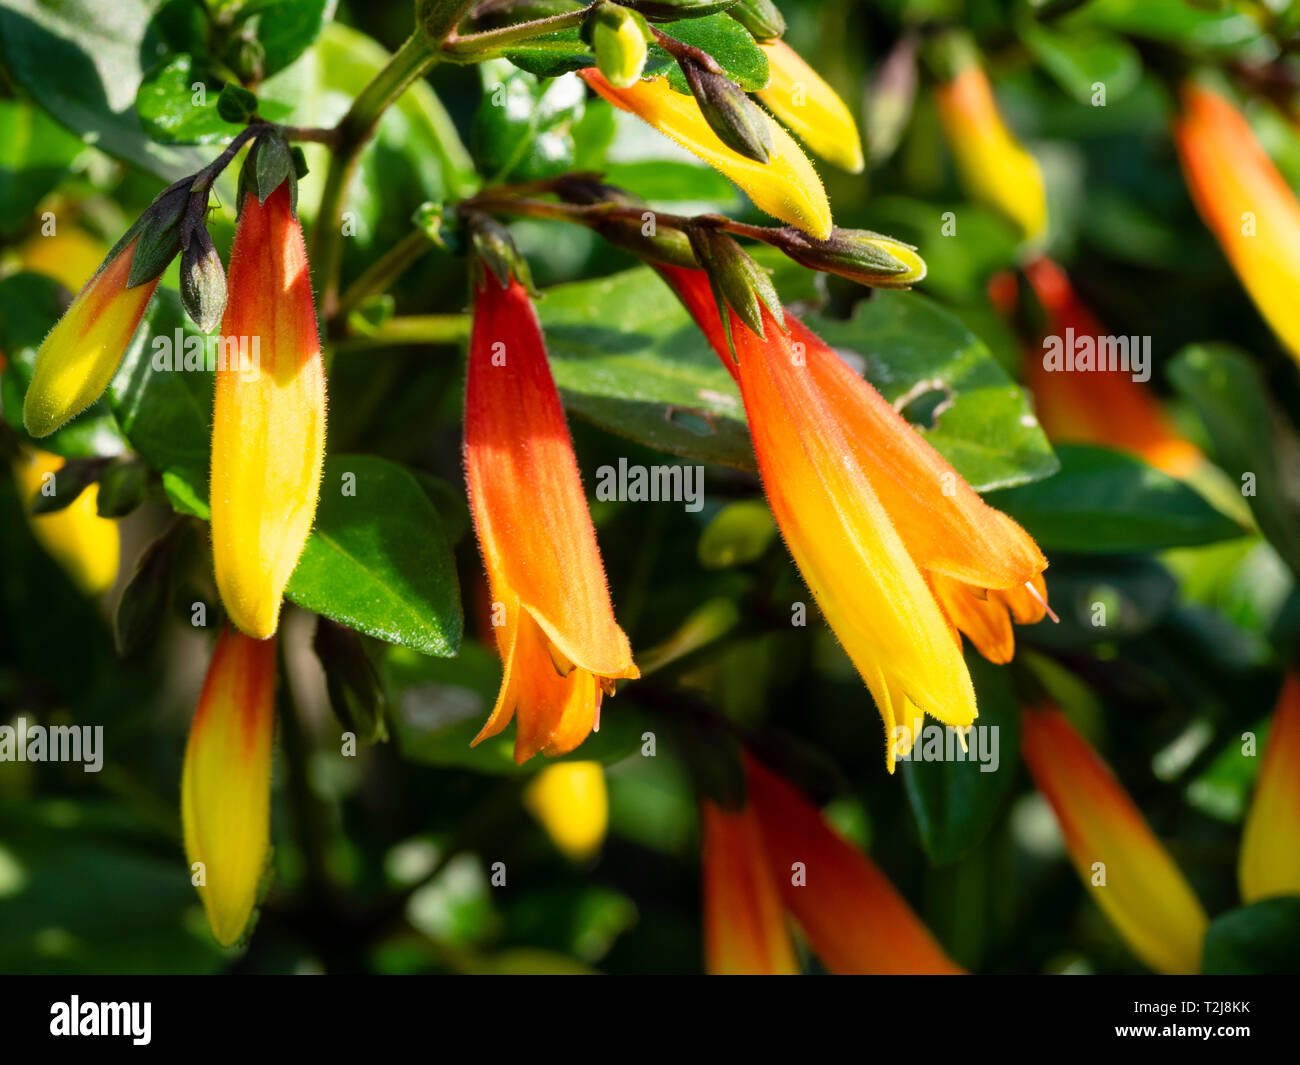 Tubular red and orange flowers of the tender, winter flowering  greenhouse plant, Justicia rizzinii Stock Photo